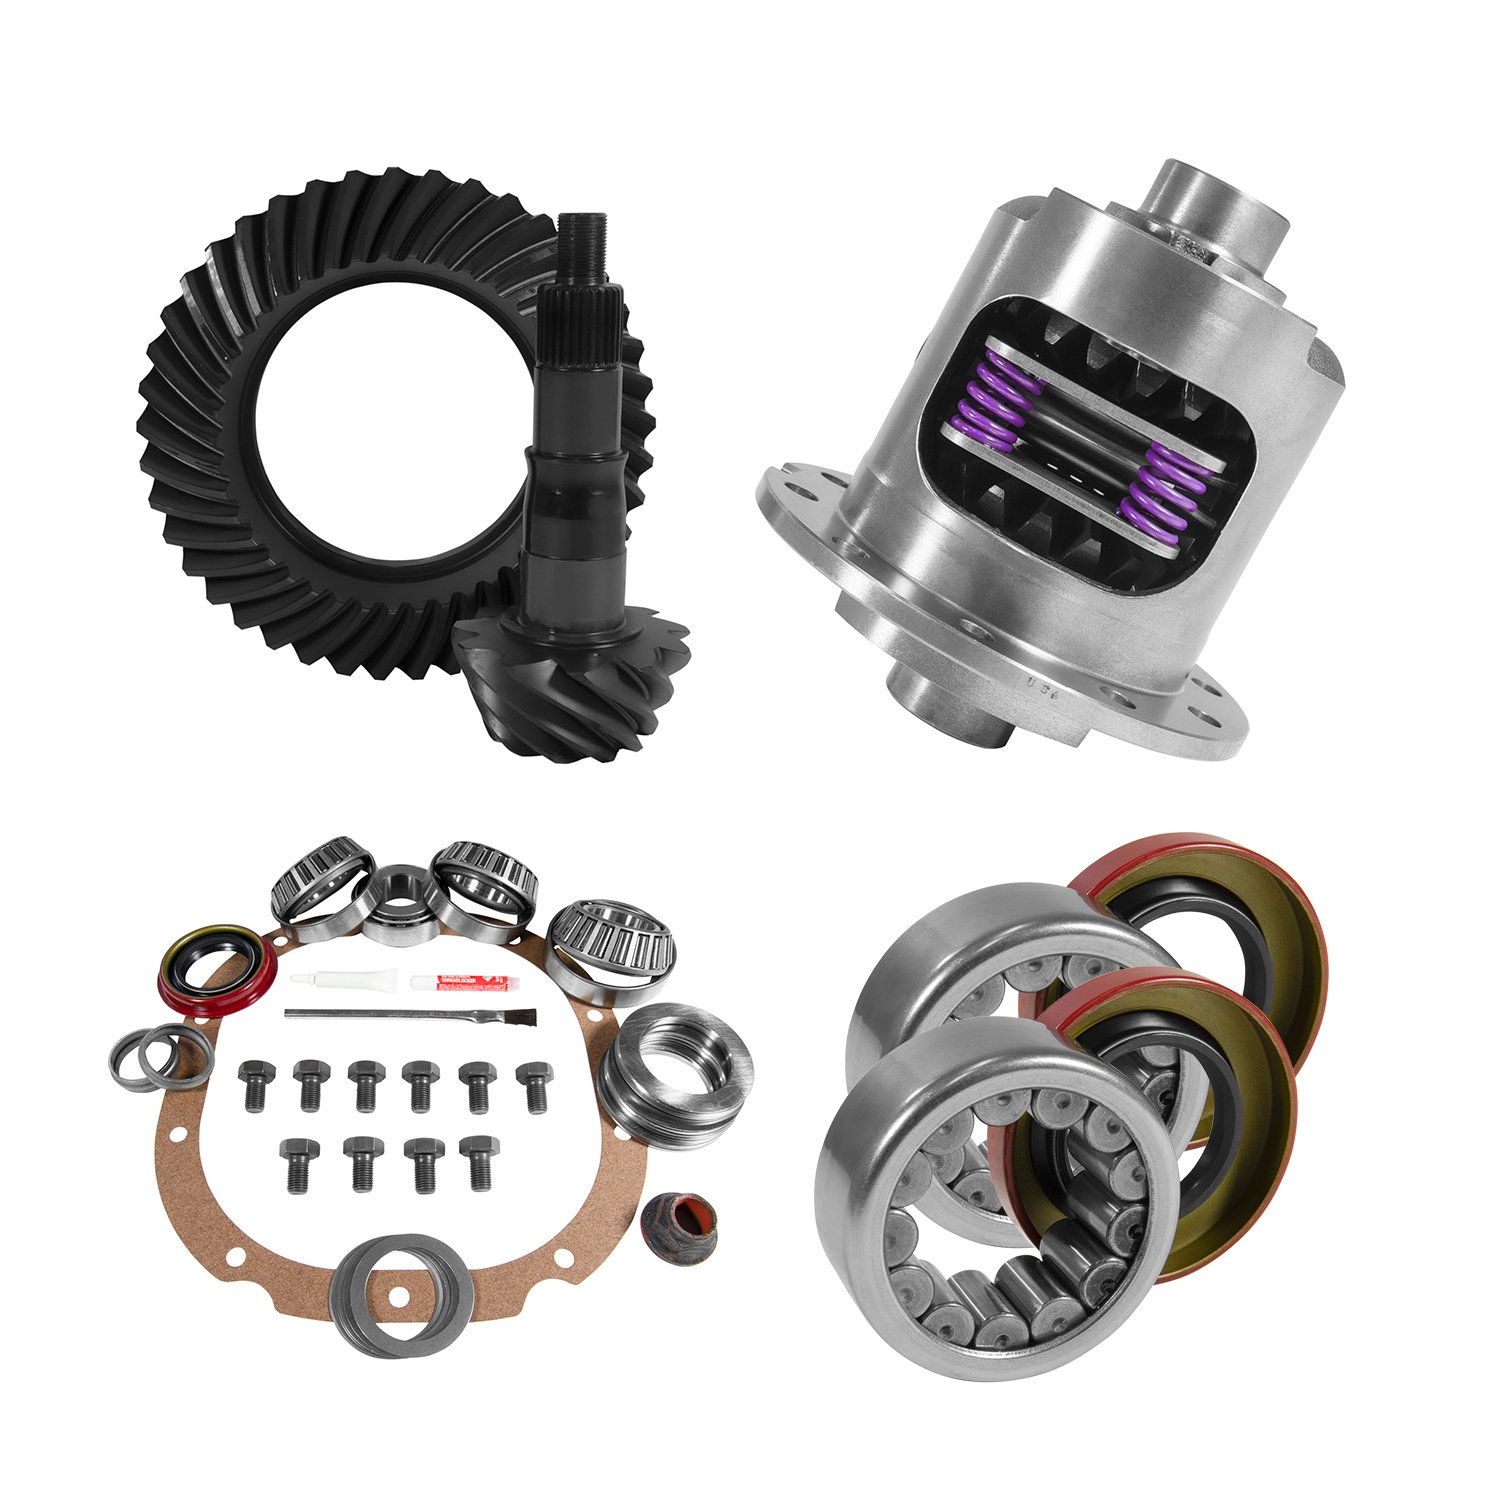 8.8 in. Ford 3.73 Rear Ring & Pinion, Install Kit, 31Spl Posi, 2.99 in. Axle Bearings